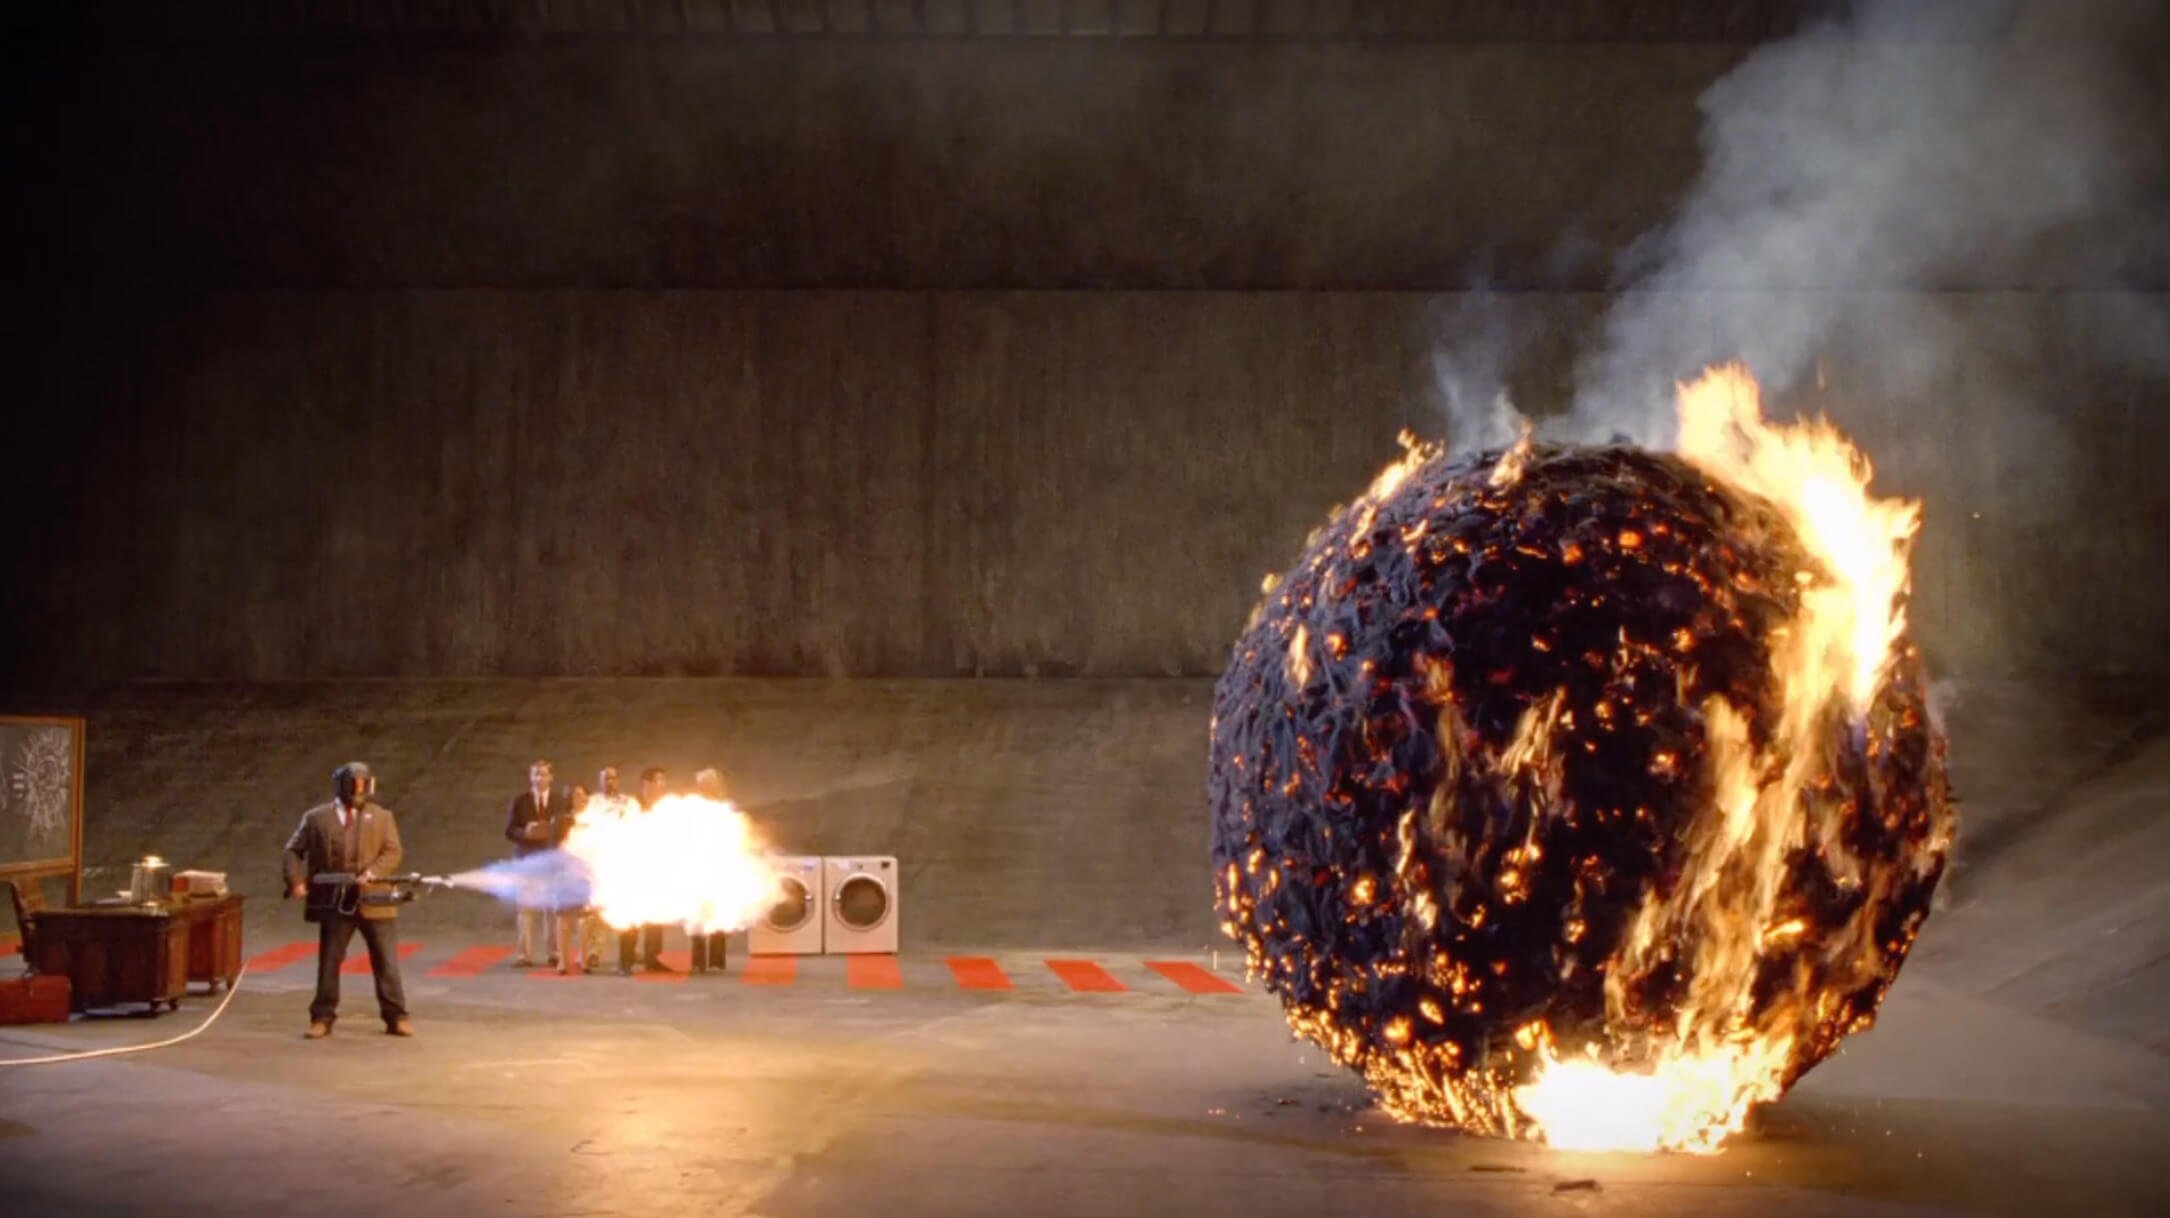 Man with blowtorch setting fire to large ball while people observe